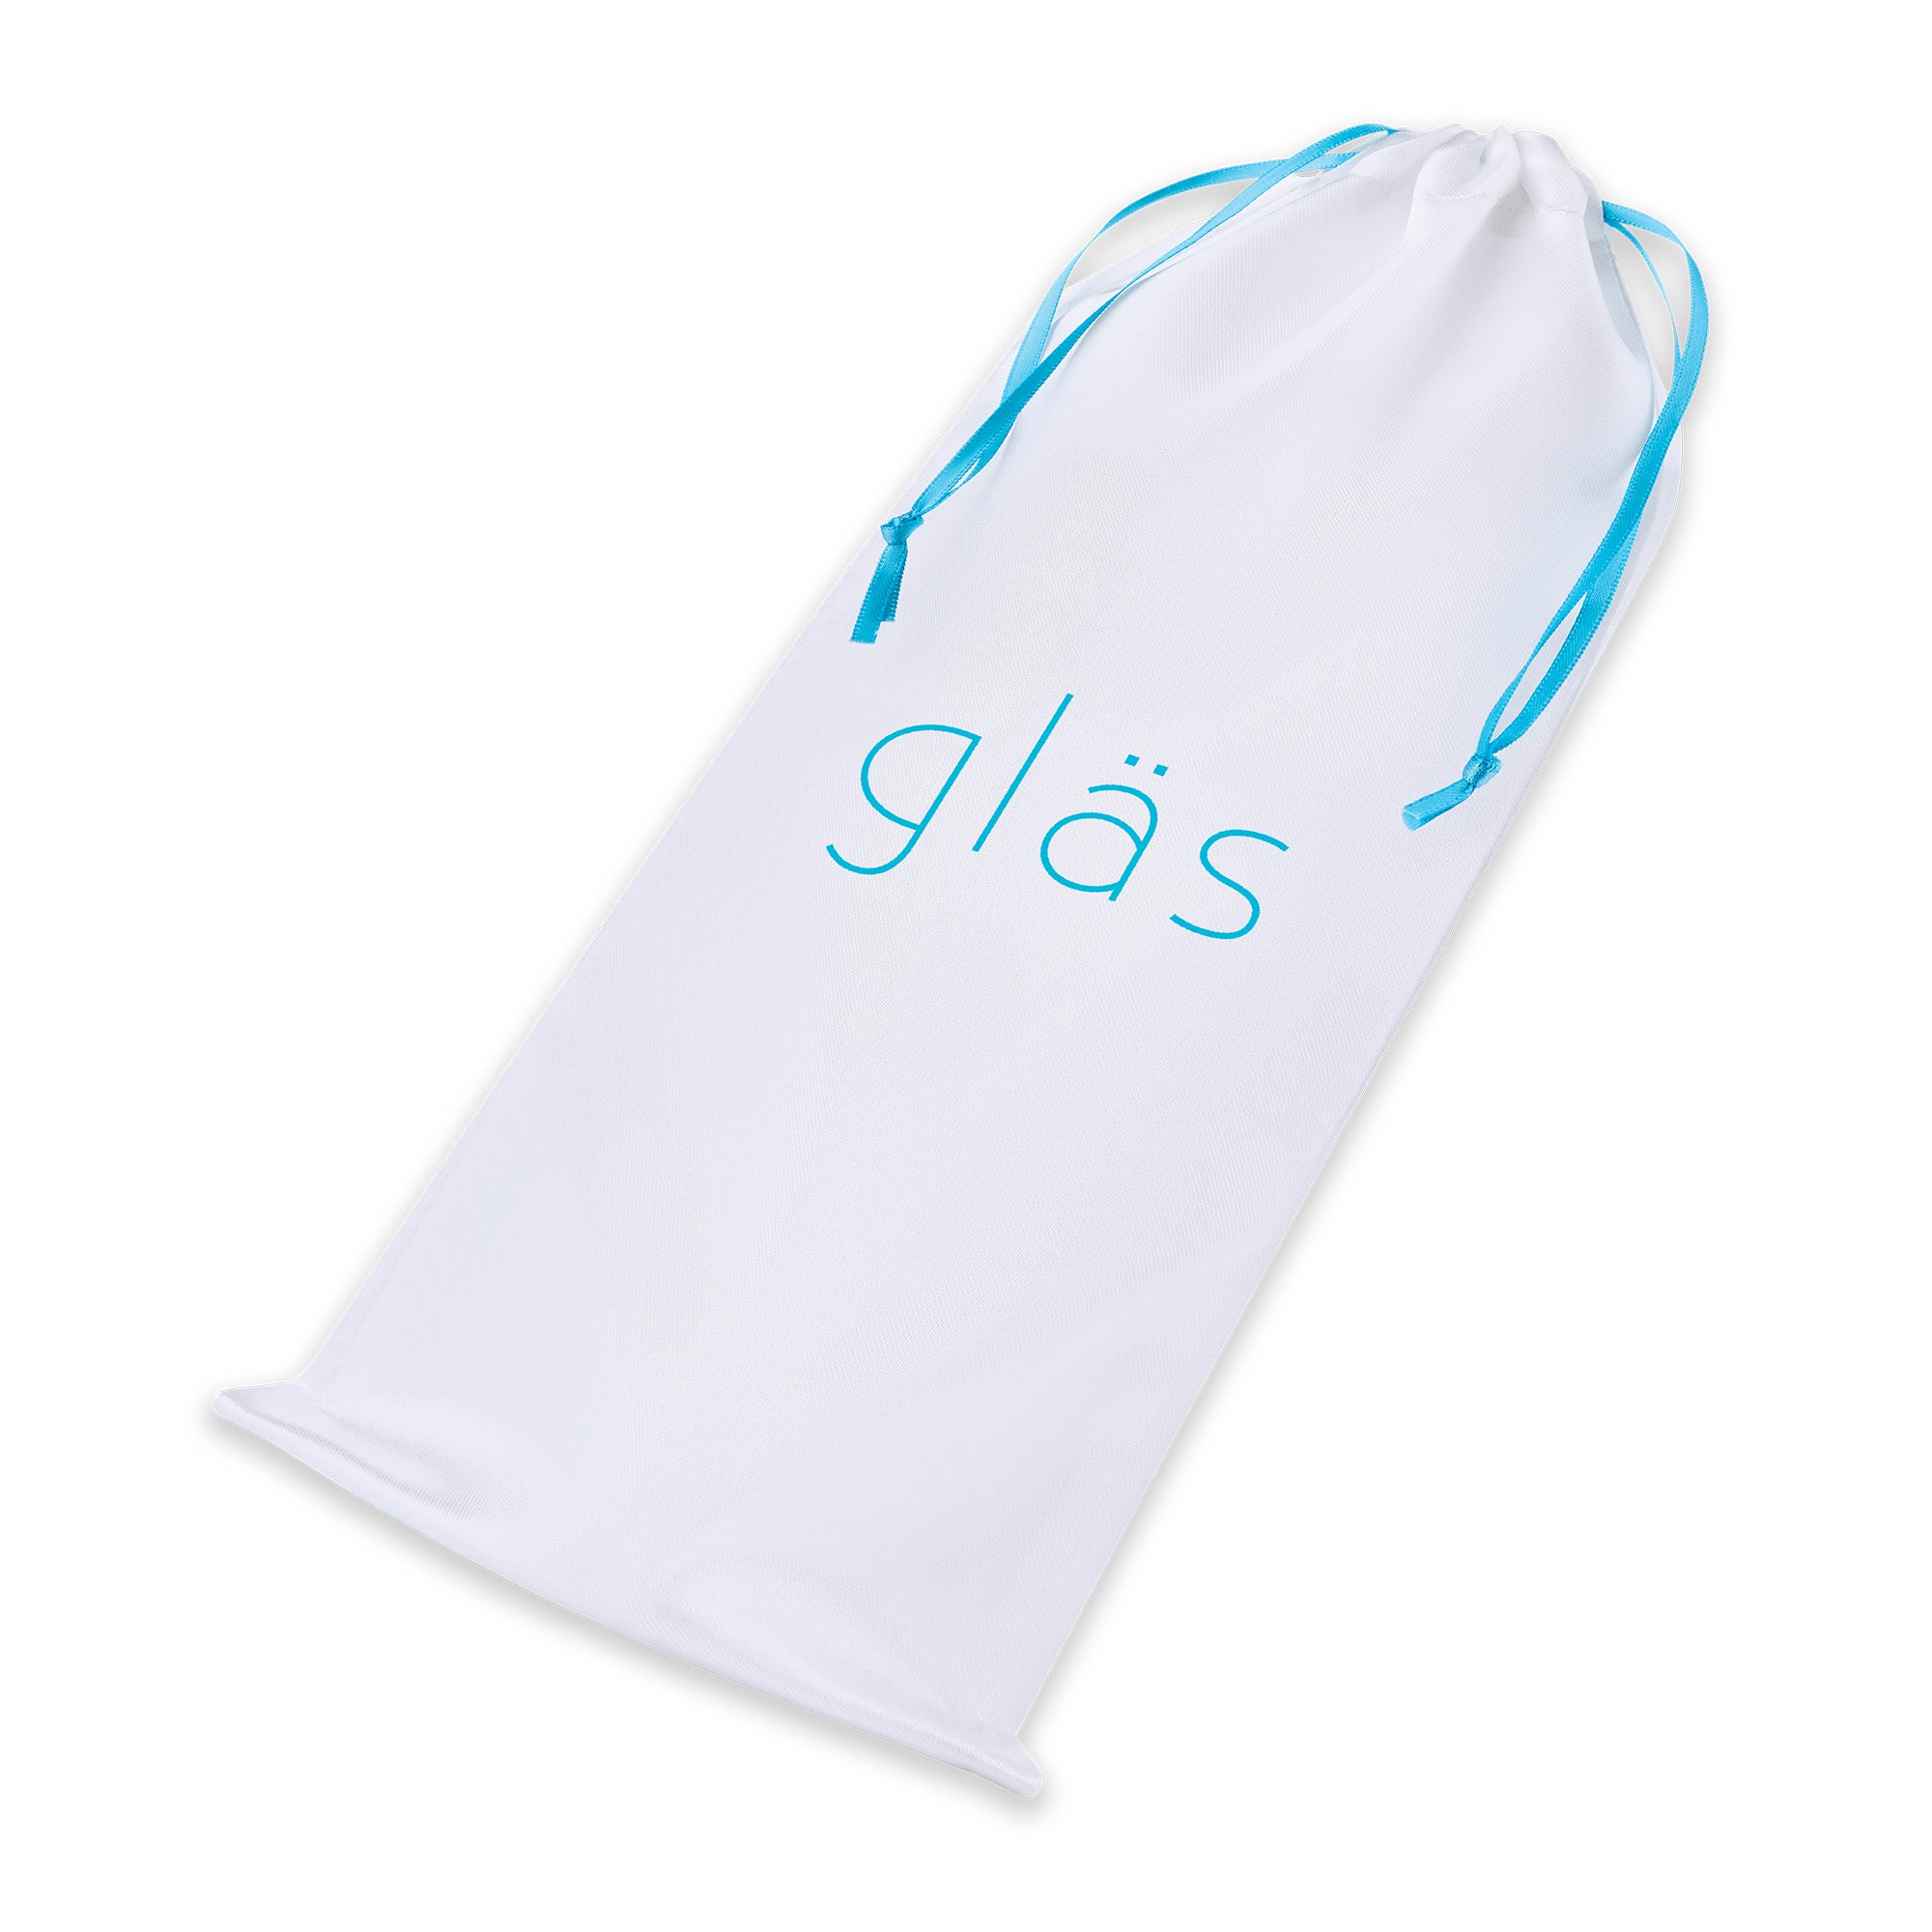 Storage Pouch of the Gläs 6.5 inch Full Tip Textured Glass Dildo